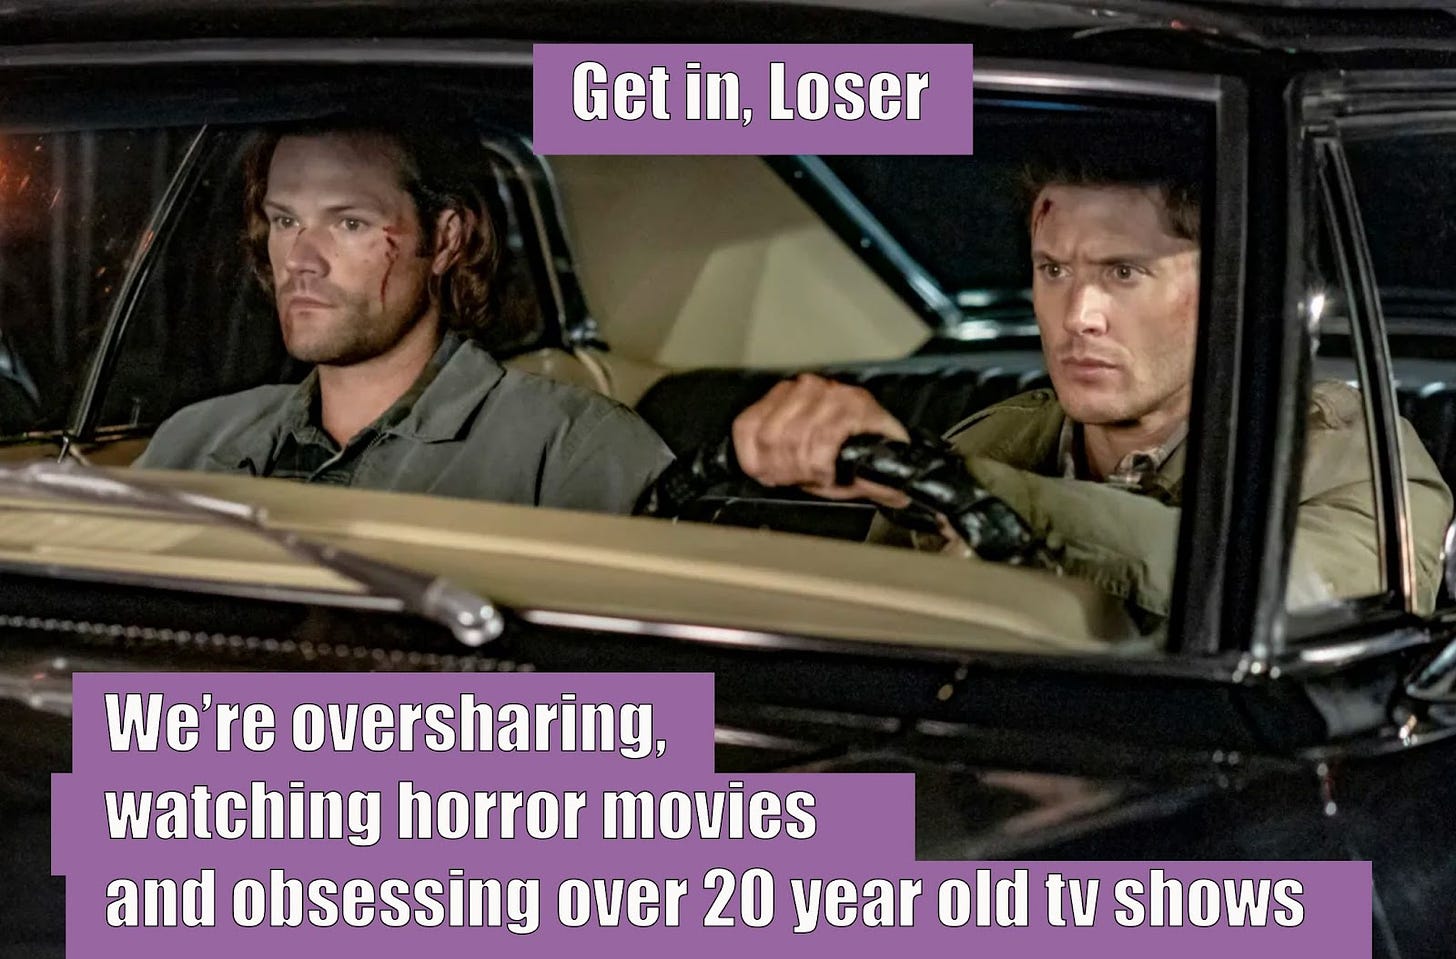 A screencap of Supernatural characters Sam and Dean in their car. A caption says "Get in, loser. We're oversharing, watching horror movies and obsessing over 20 year old tv shows."